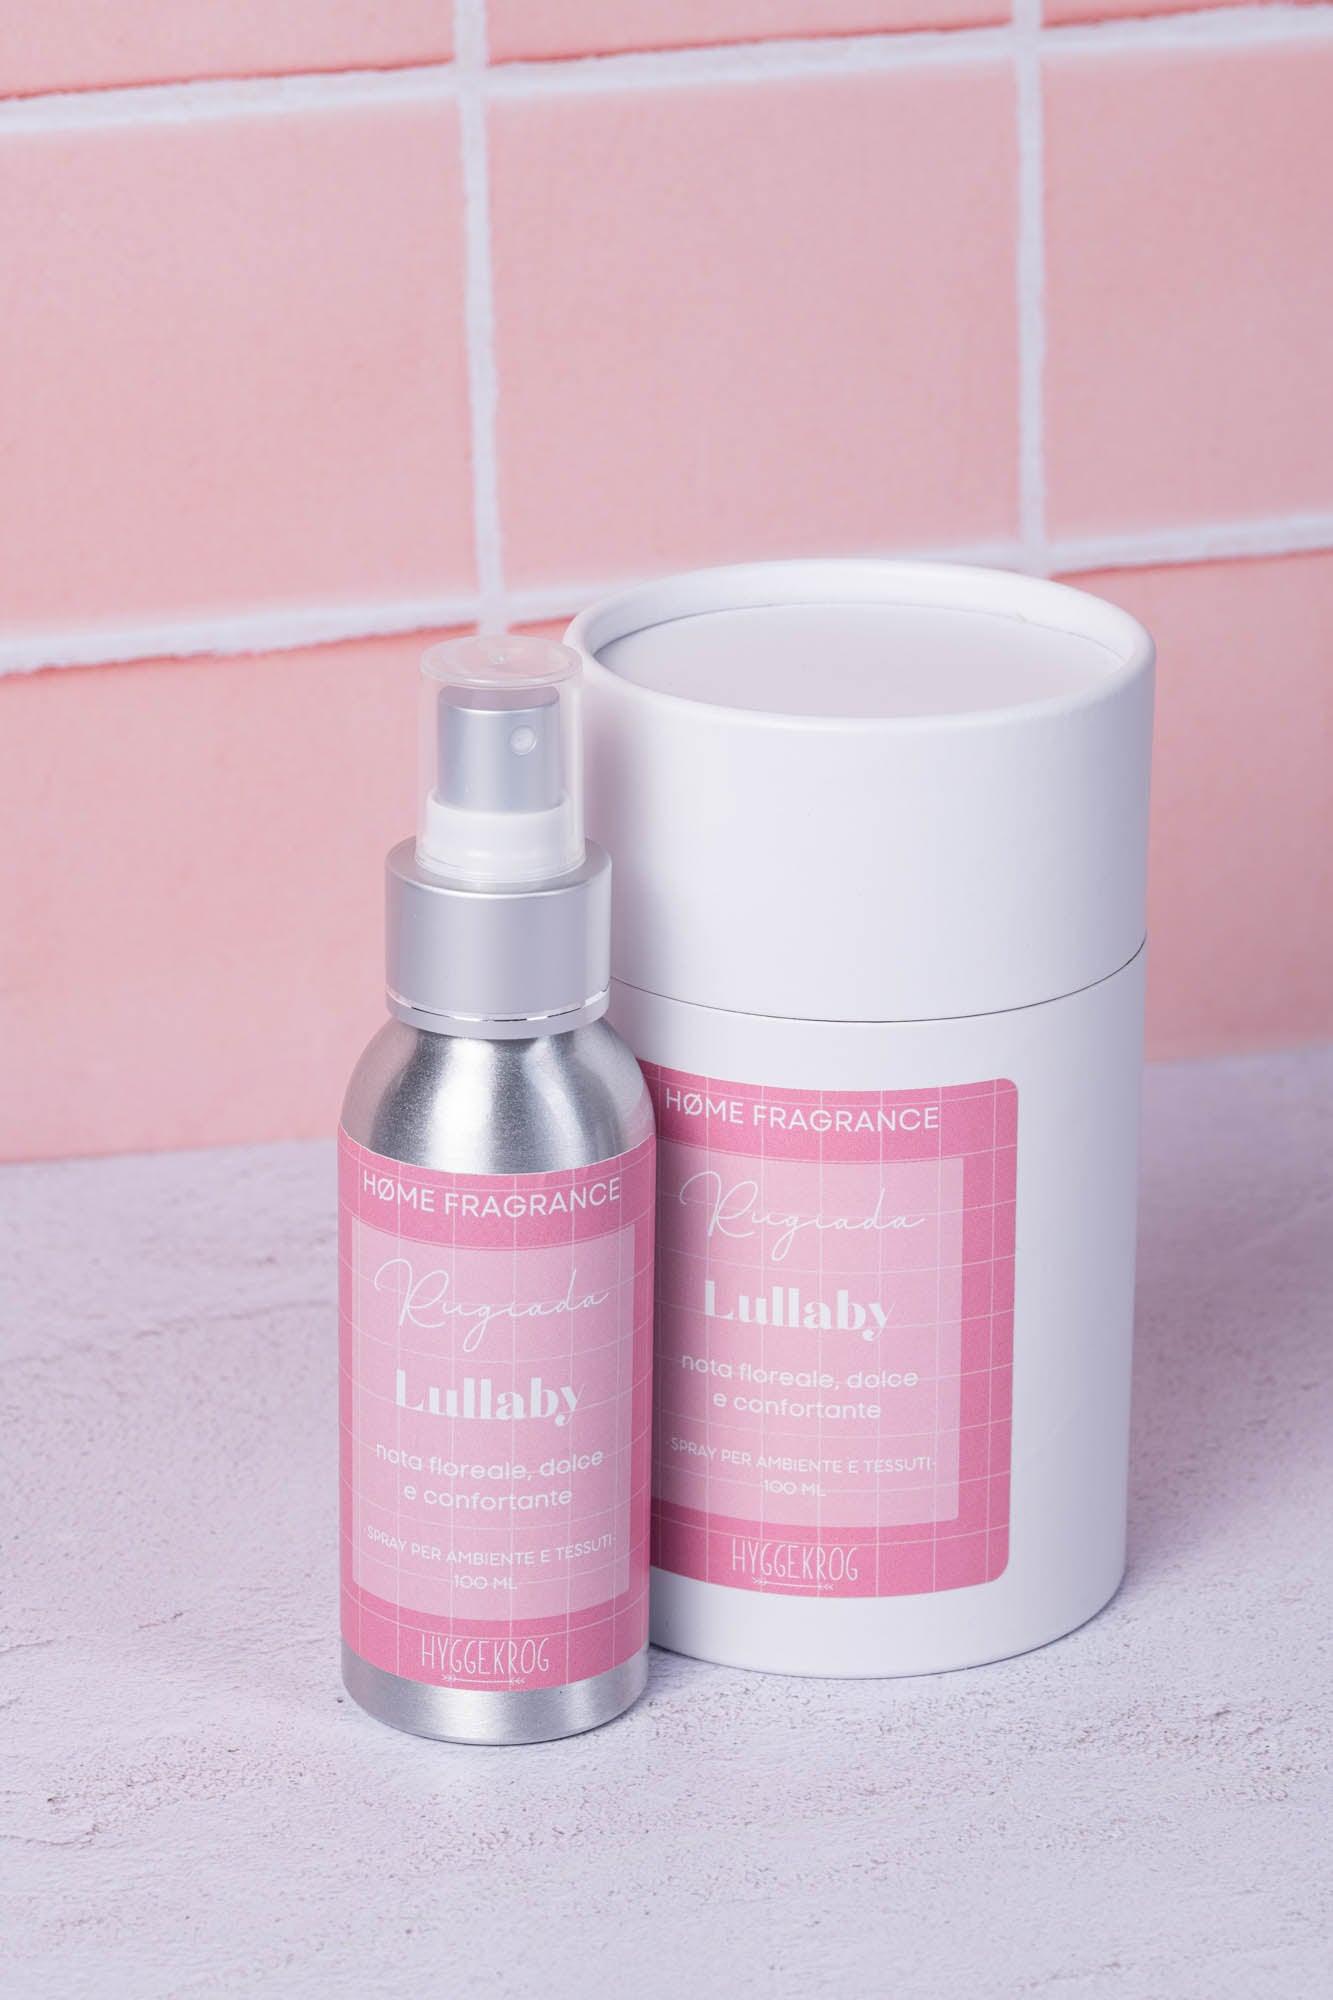 Lullaby | magnolia e gelsomino - Hyggekrog - Candle&Co